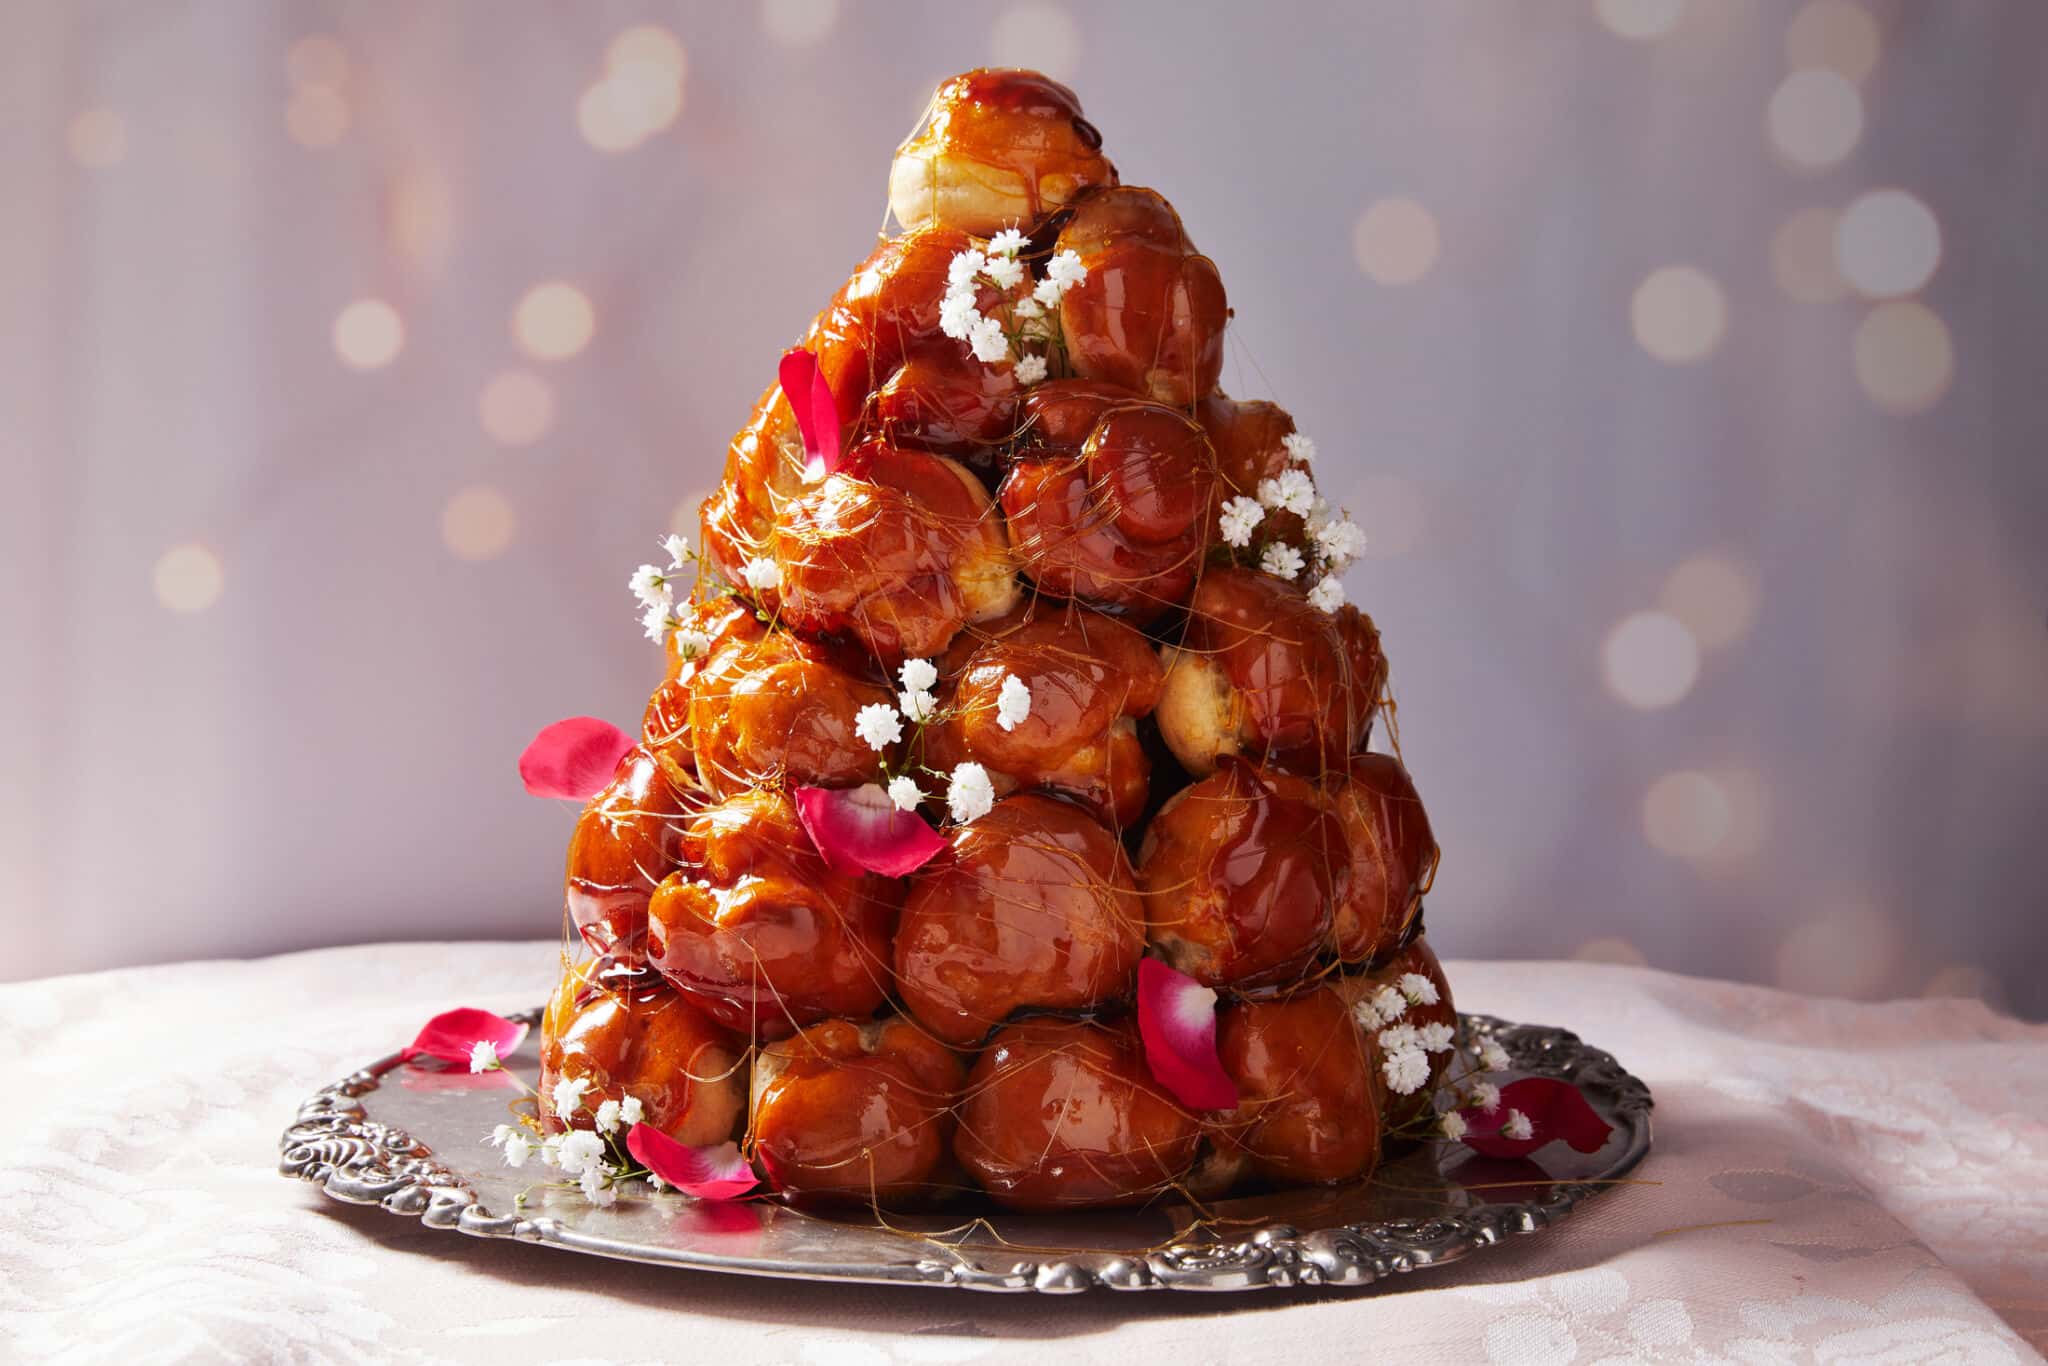 A tower of cream puffs glazed in caramel sauce, with floral decorations on a plate.